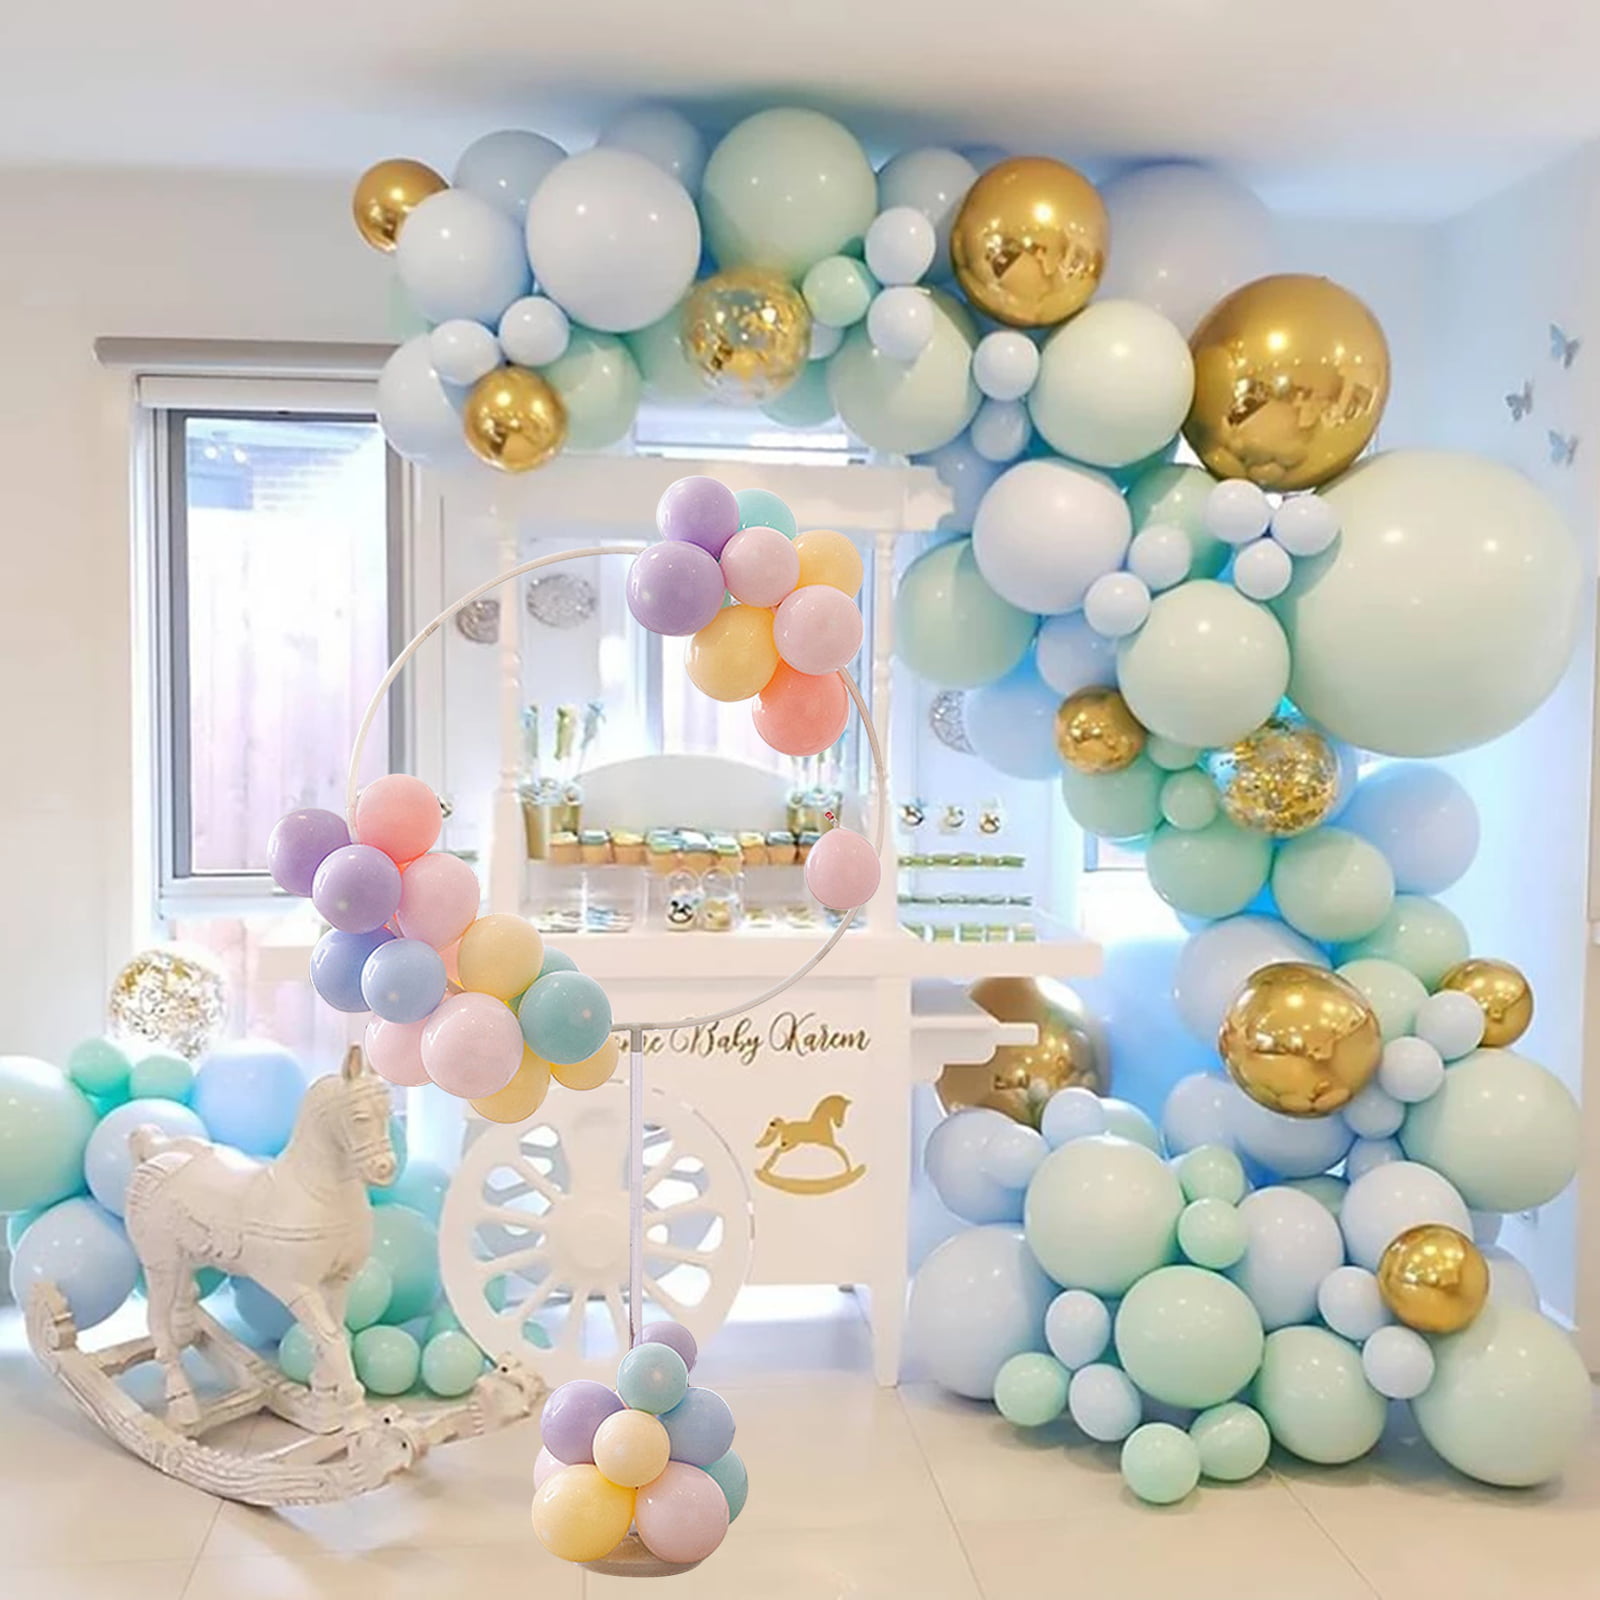 Details about   163x73cm Circle Balloon Arch Frame Balloons Stand Holder Kit Wedding decor SF 